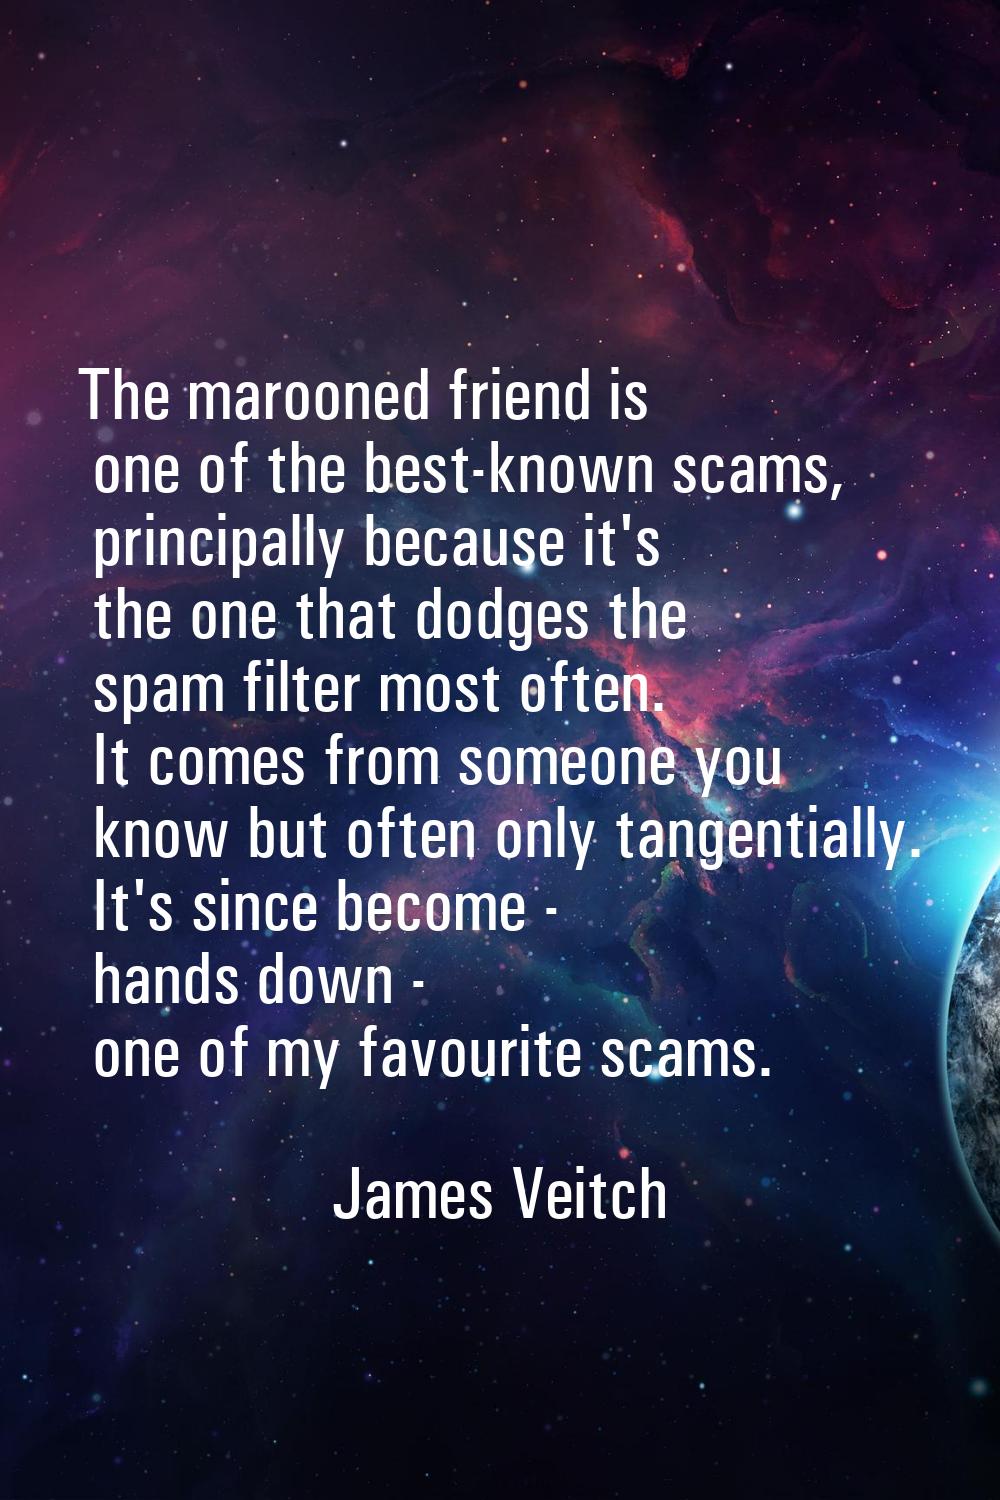 The marooned friend is one of the best-known scams, principally because it's the one that dodges th